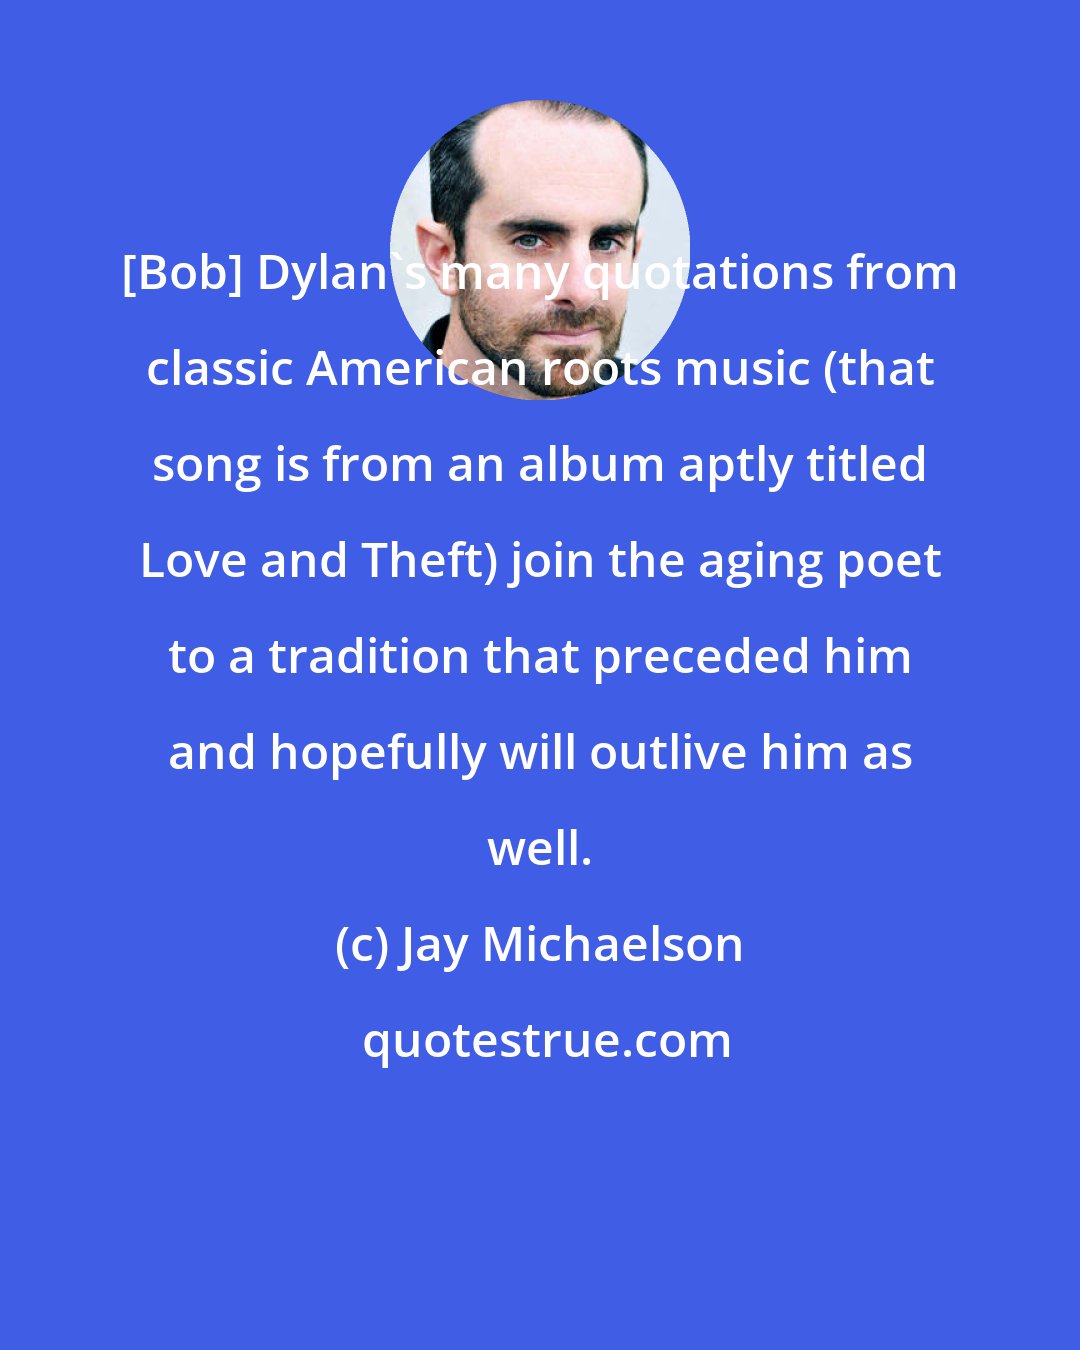 Jay Michaelson: [Bob] Dylan's many quotations from classic American roots music (that song is from an album aptly titled Love and Theft) join the aging poet to a tradition that preceded him and hopefully will outlive him as well.